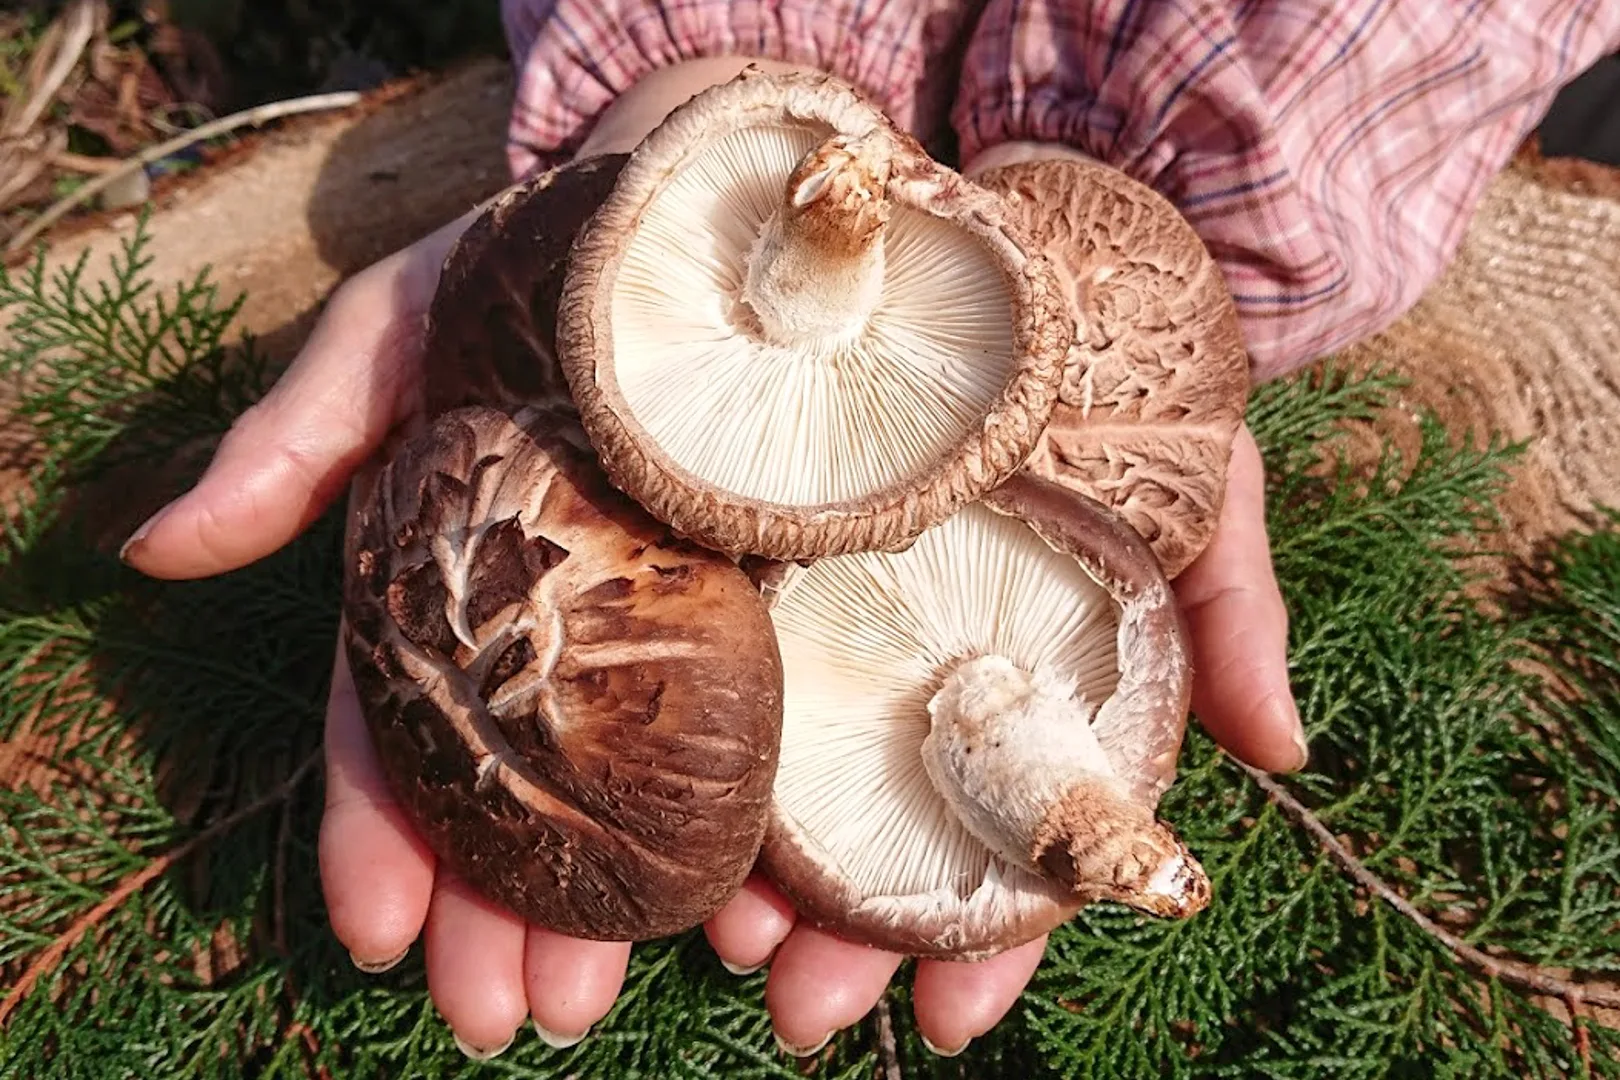 Two hands outstretched and cupped together holding a number of shiitake mushrooms on the Kunisaki Peninsula, Oita Prefecture. Some of the shiitake mushrooms are positioned to show the cap, others have been turned upside down to show the underside. Below is a woven basket with green foliage and the sleeves of the person holding the shiitake are long in a pink plaid material with elastic around the wrists.